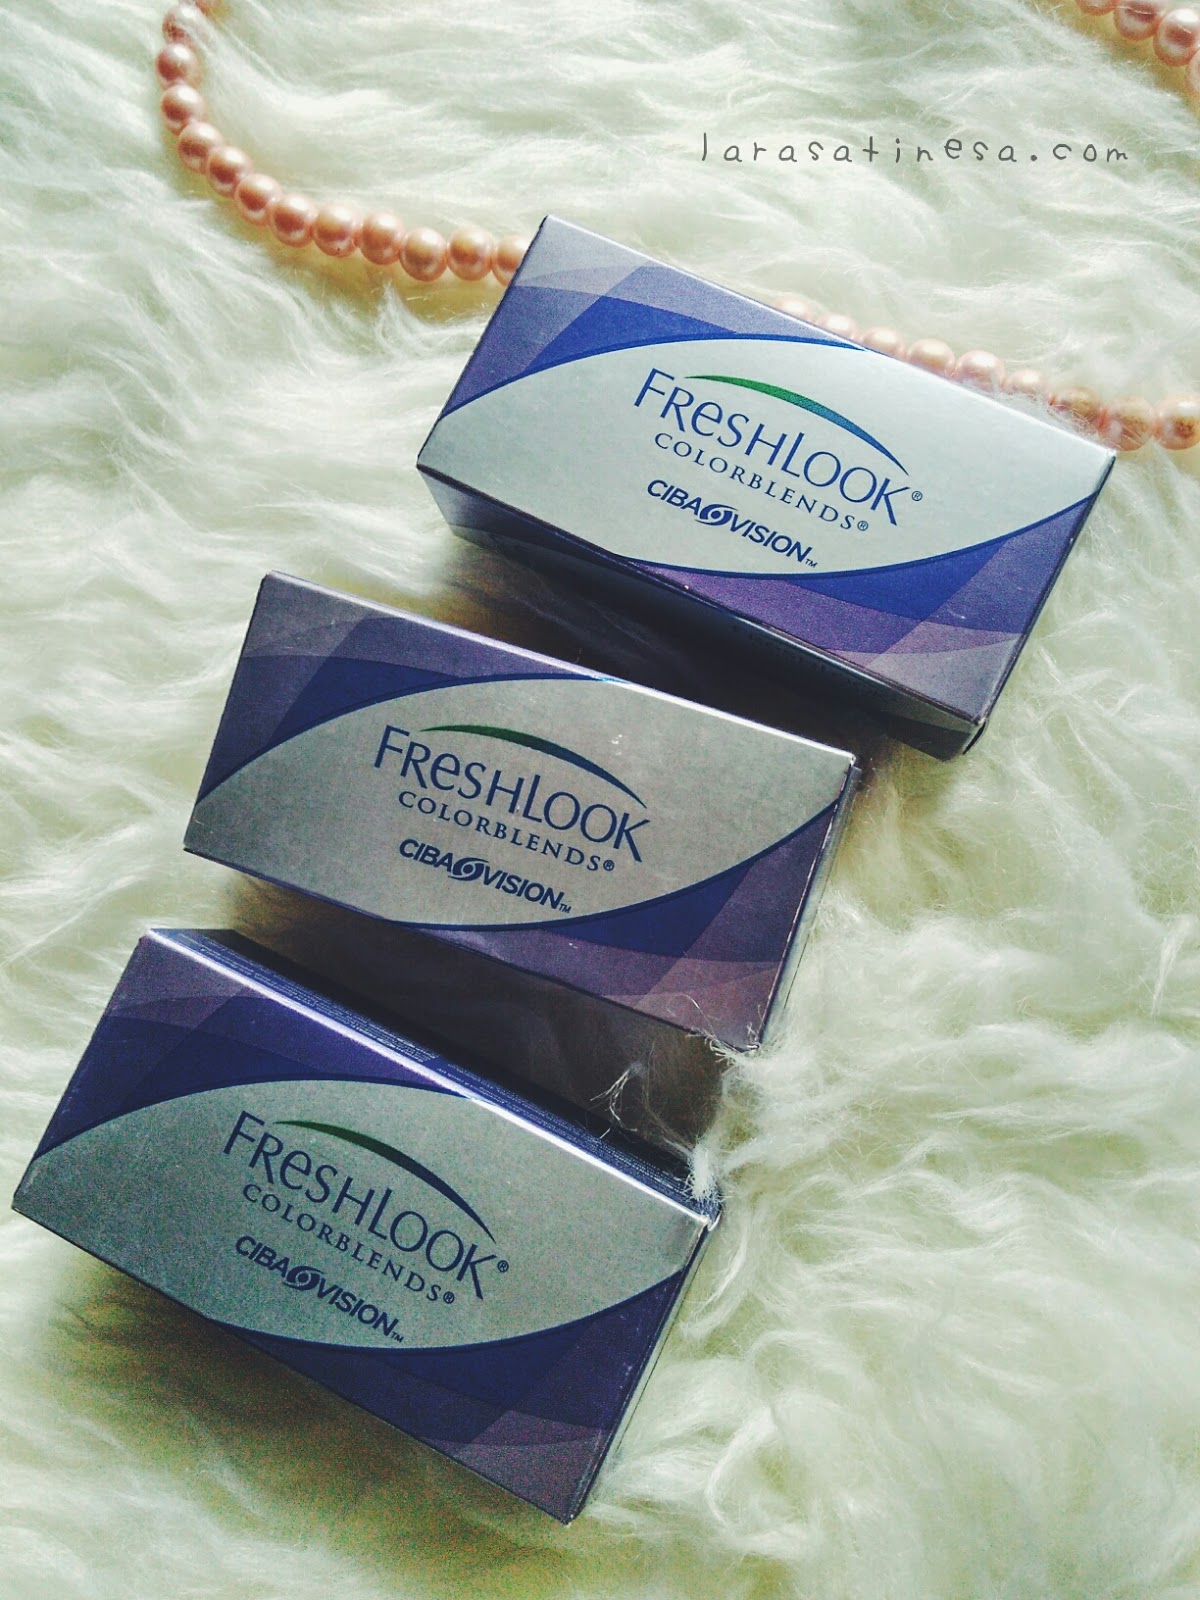 [REVIEW] : Freshlook Colorblends Softlens (Bahasa Indonesia) - The